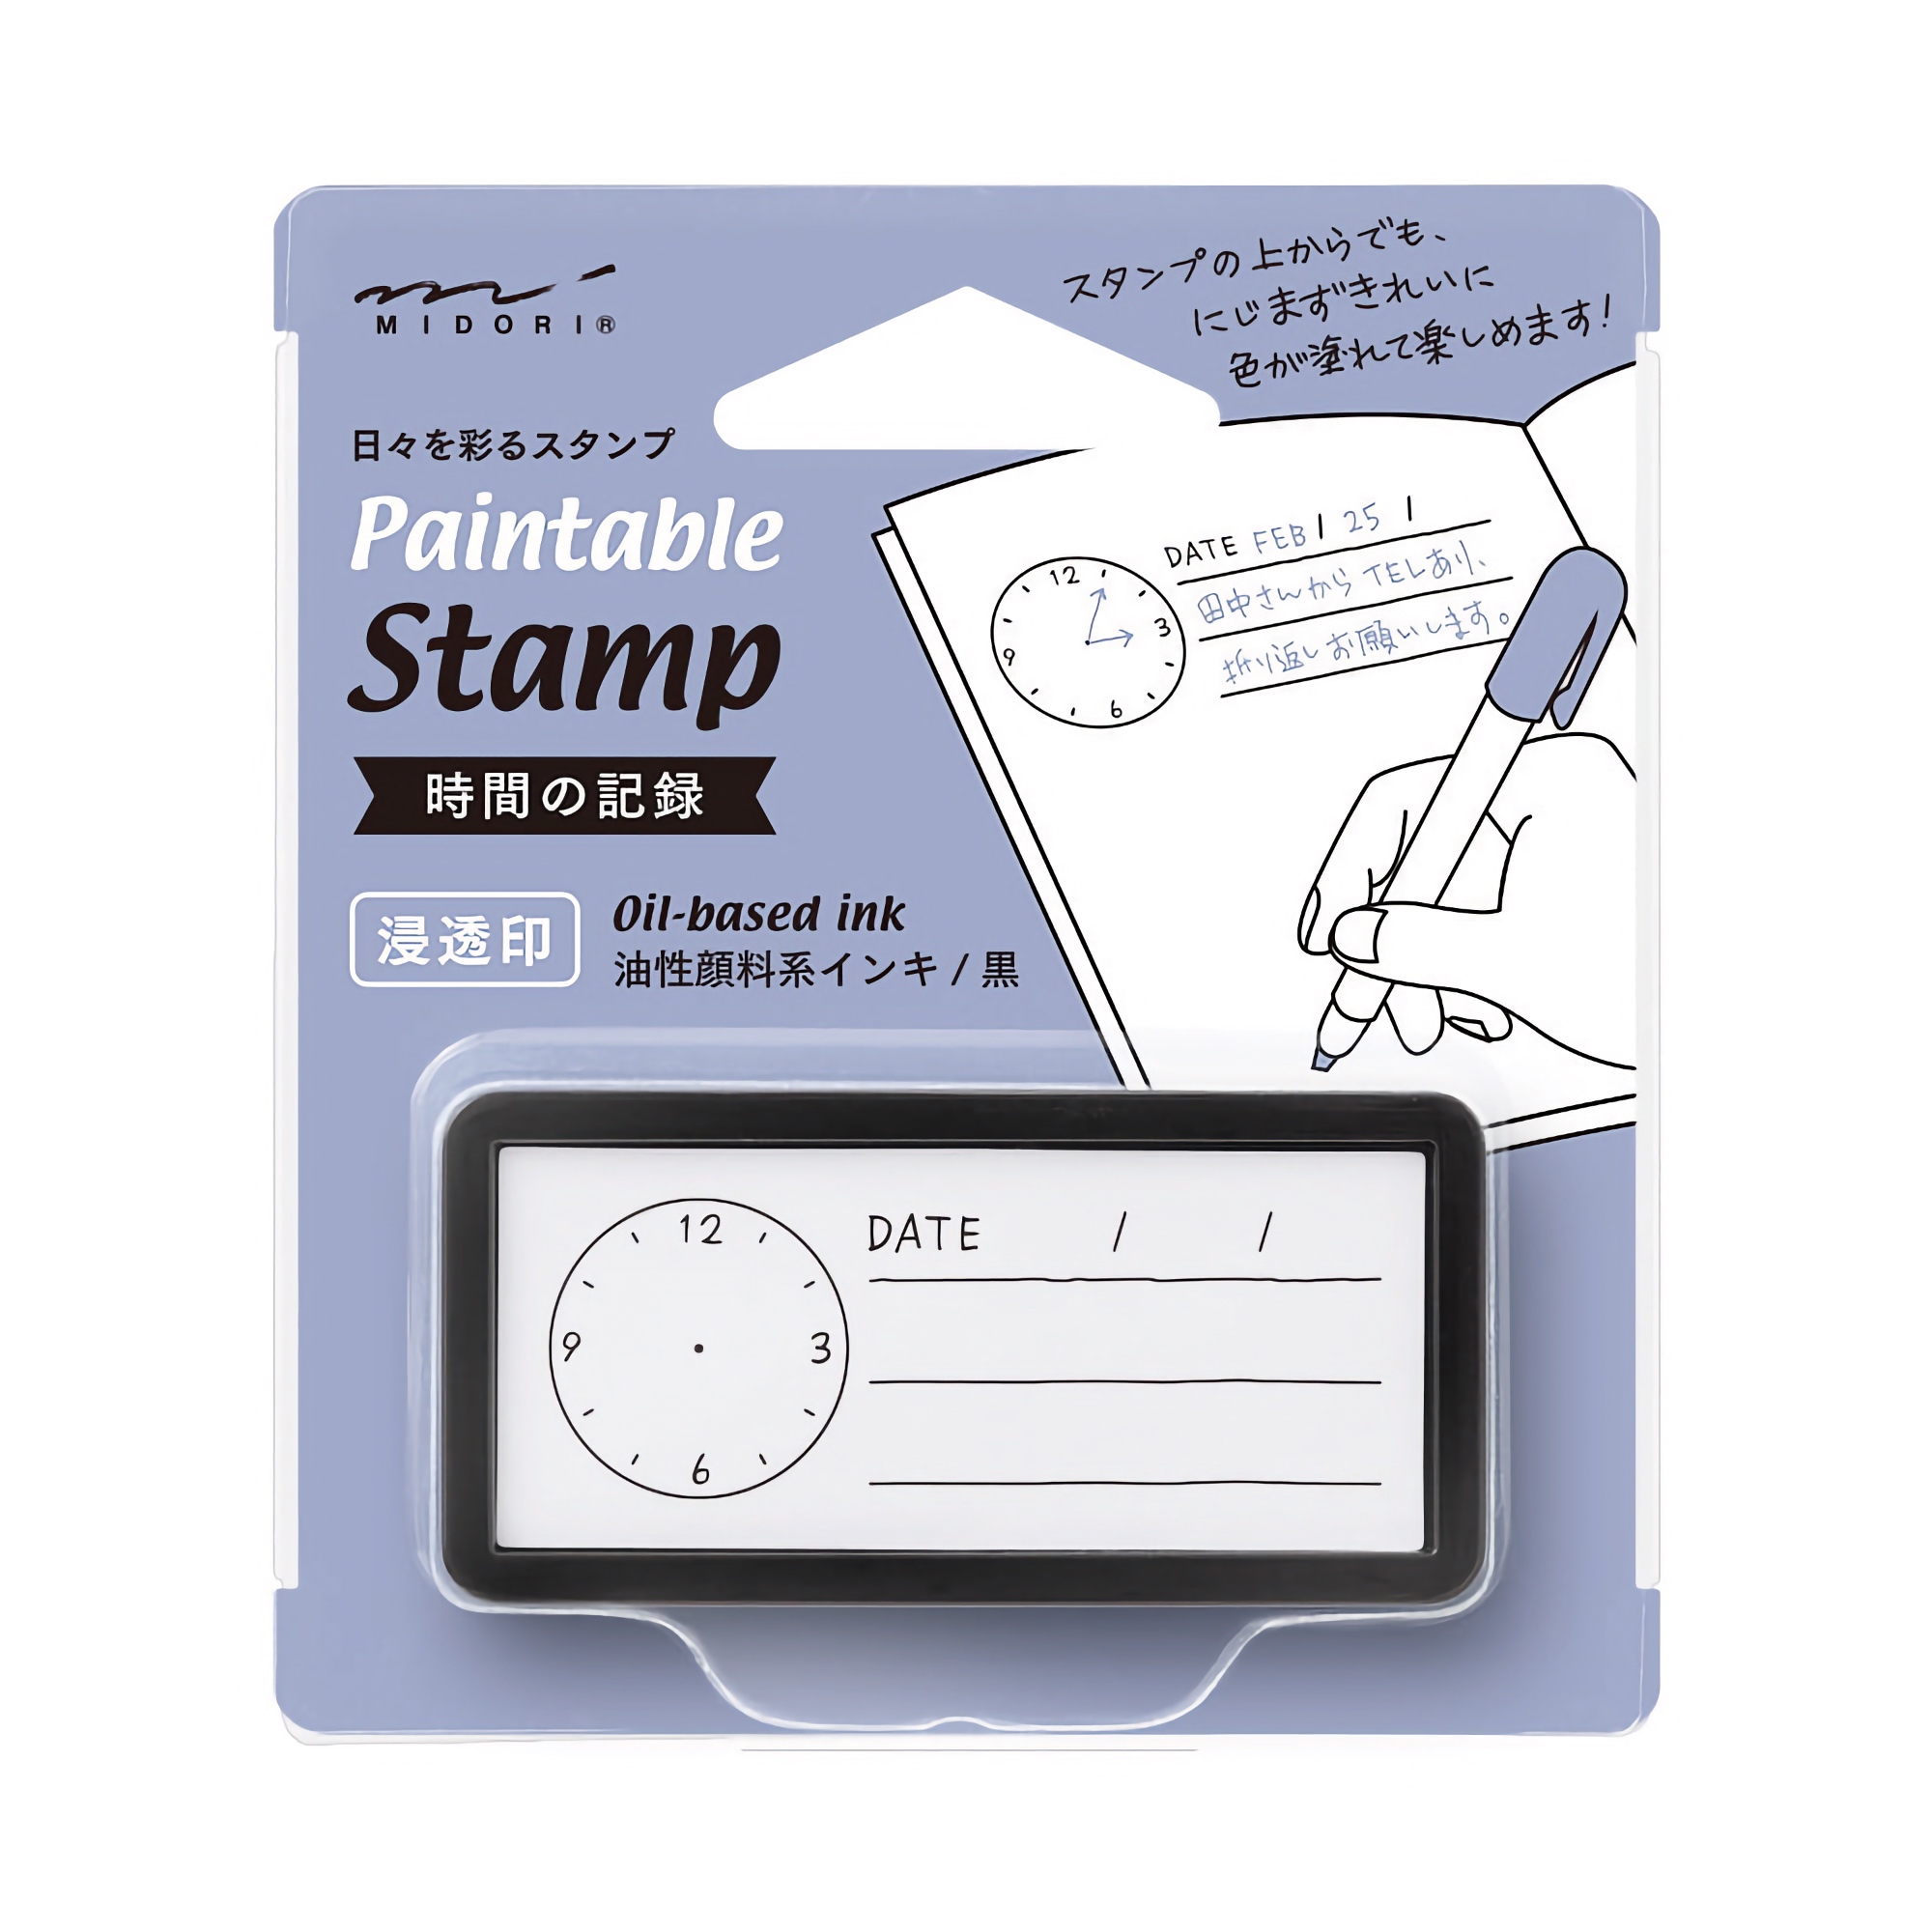 Midori Paintable Stamp Pre-inked Half Size Time and Date